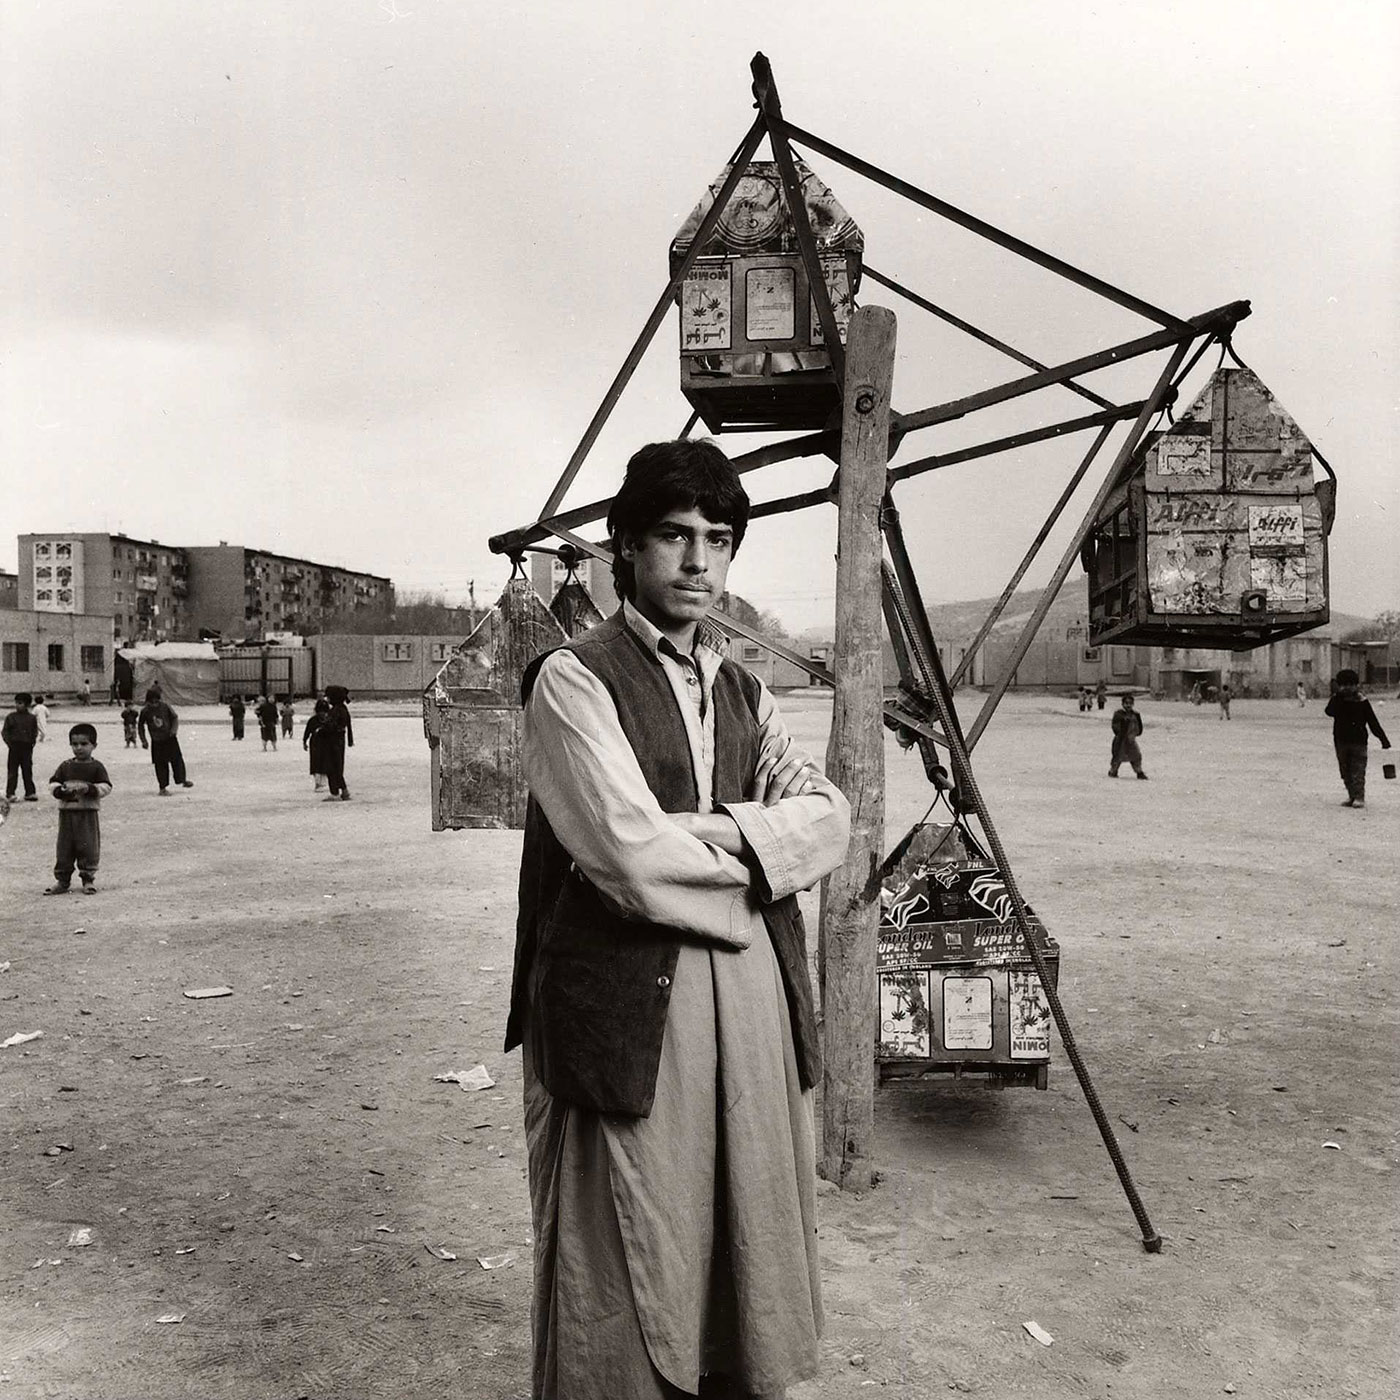 Black and white photograph of a young man, standing outside with his arms crossed, in front of a small Ferris wheel made of wood and scrap metal.